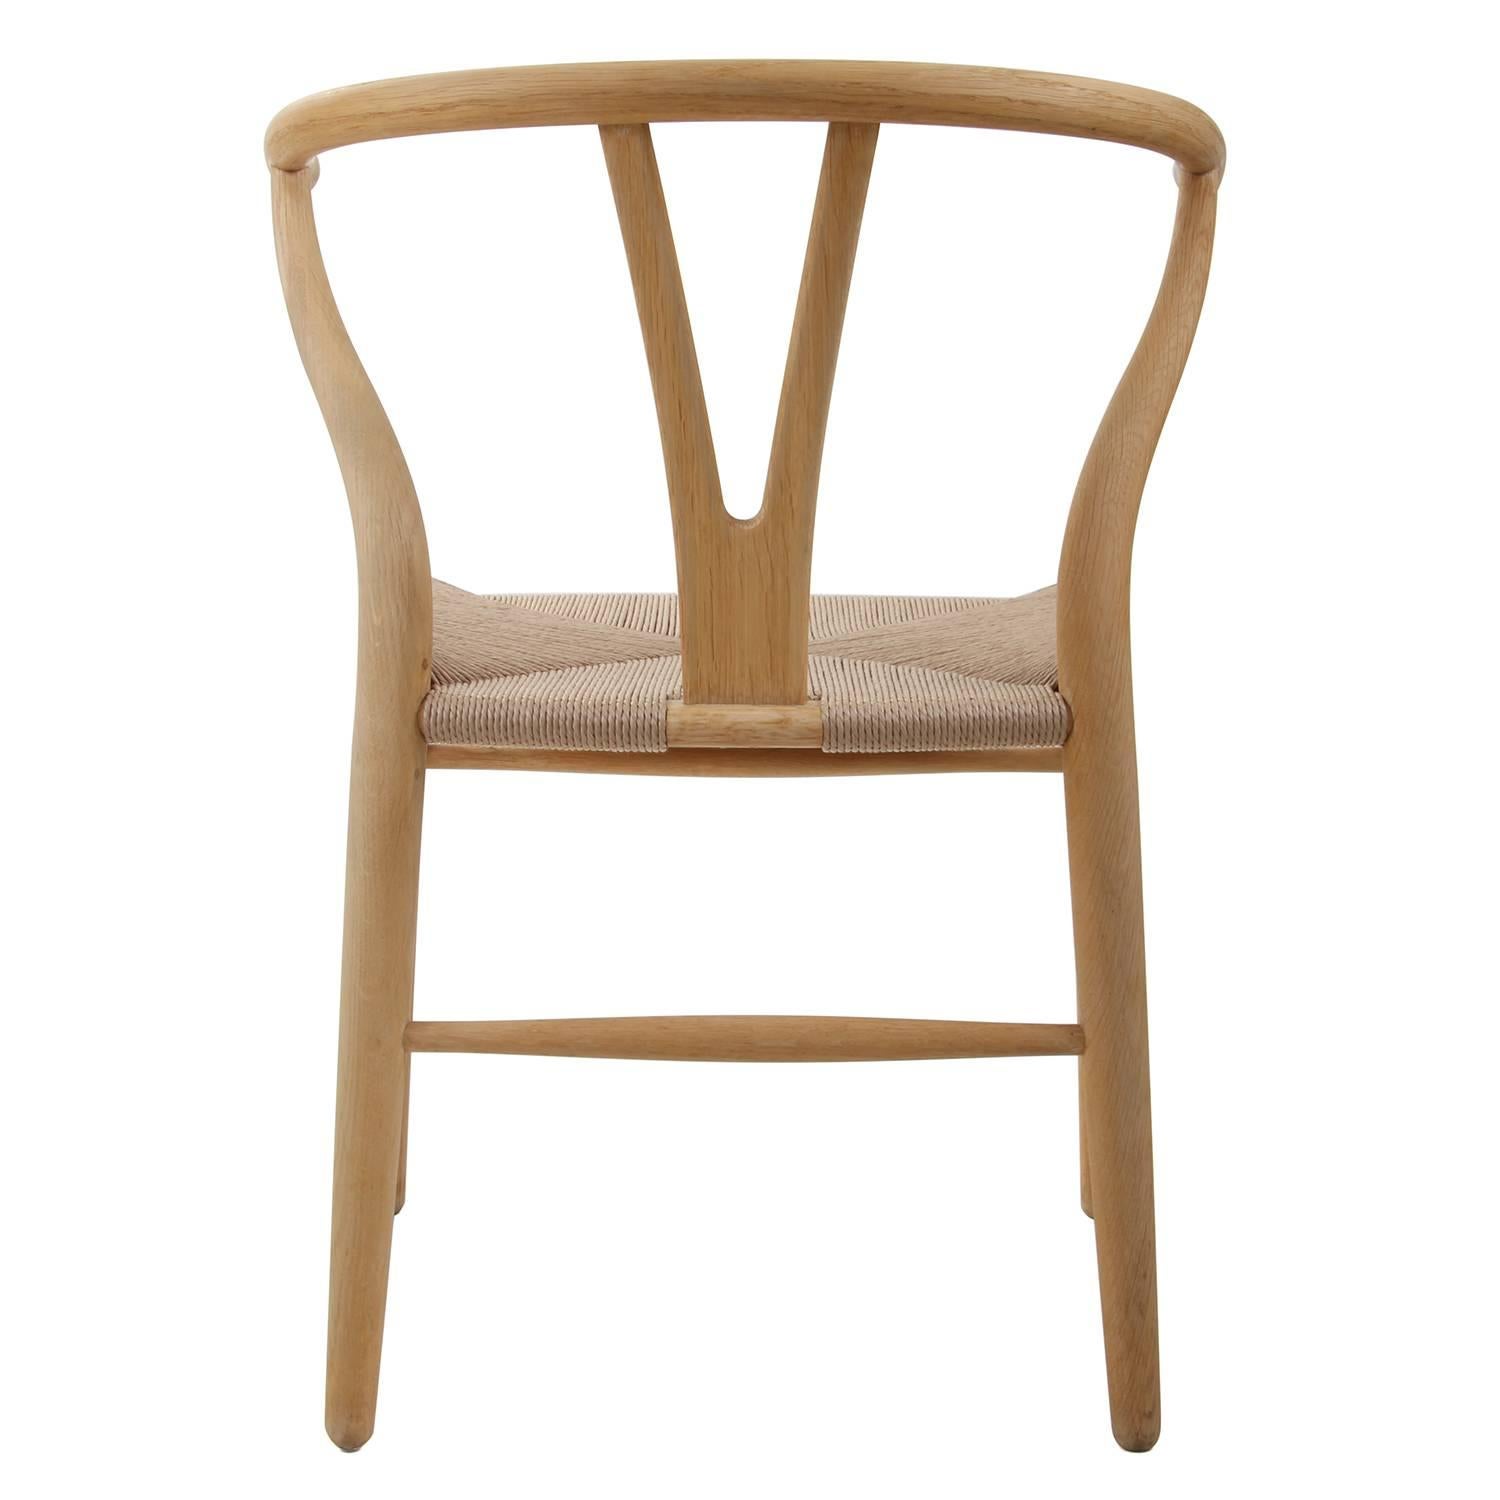 SOURCED and RESERVED for LUKE

***************
CH24 - pair of wishbone chair by Hans J Wegner for Carl Hansen and Søn in 1949, iconic Danish design - vintage oak wishbone-chair, soap-treated and fitted with new woven paper cord seat. In excellent